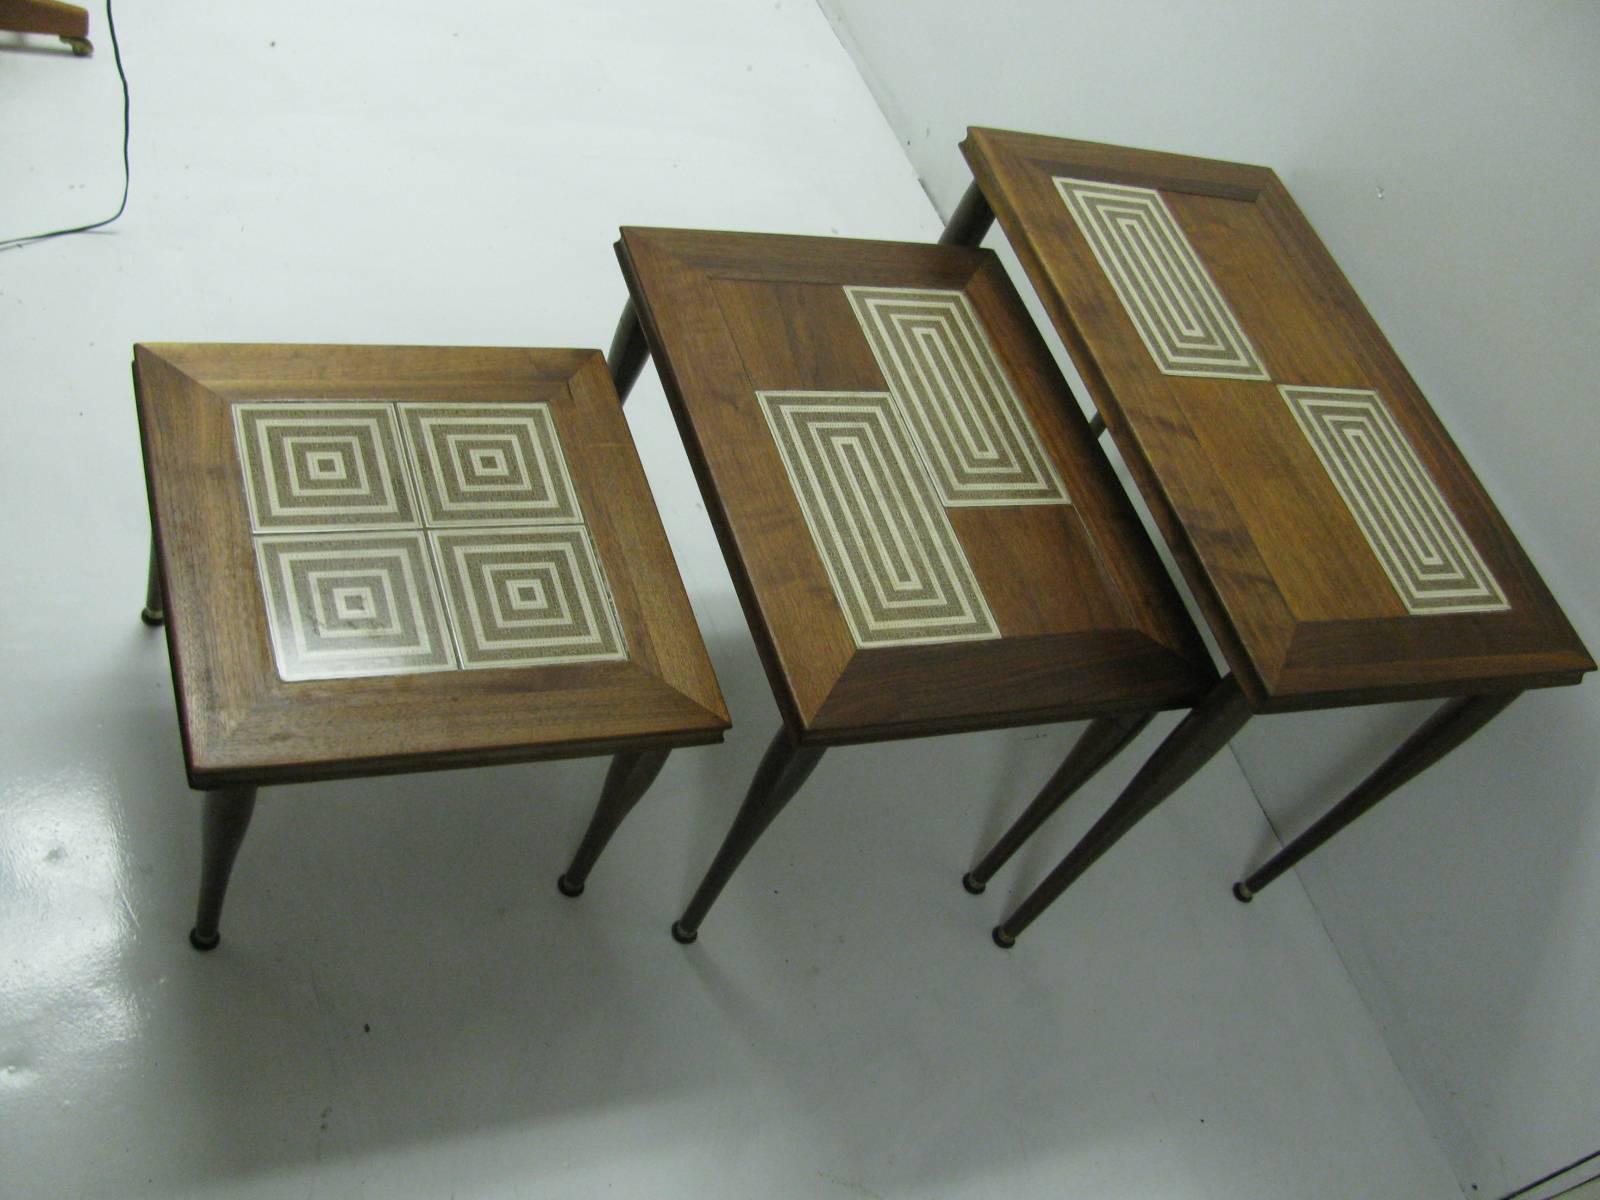 Walnut tables with ceramic tiles. Middle table is 23.75 x 18 x18 height. Smaller table is 18 x 18 x 14.25 height.